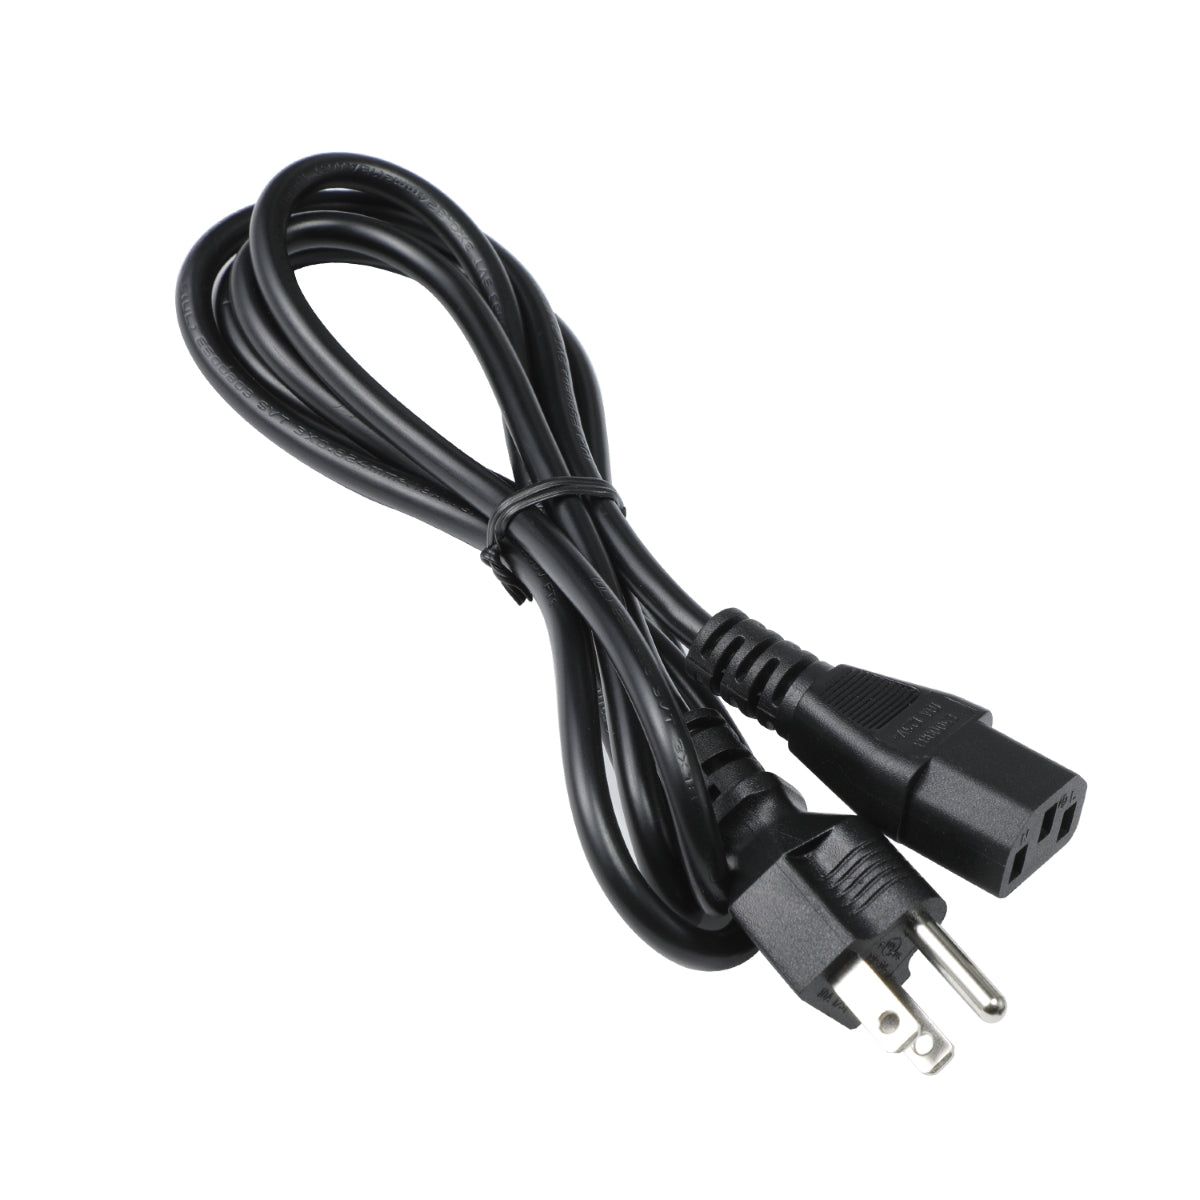 Power Cord for Epson WorkForce Pro WF-6590 Color Printer.